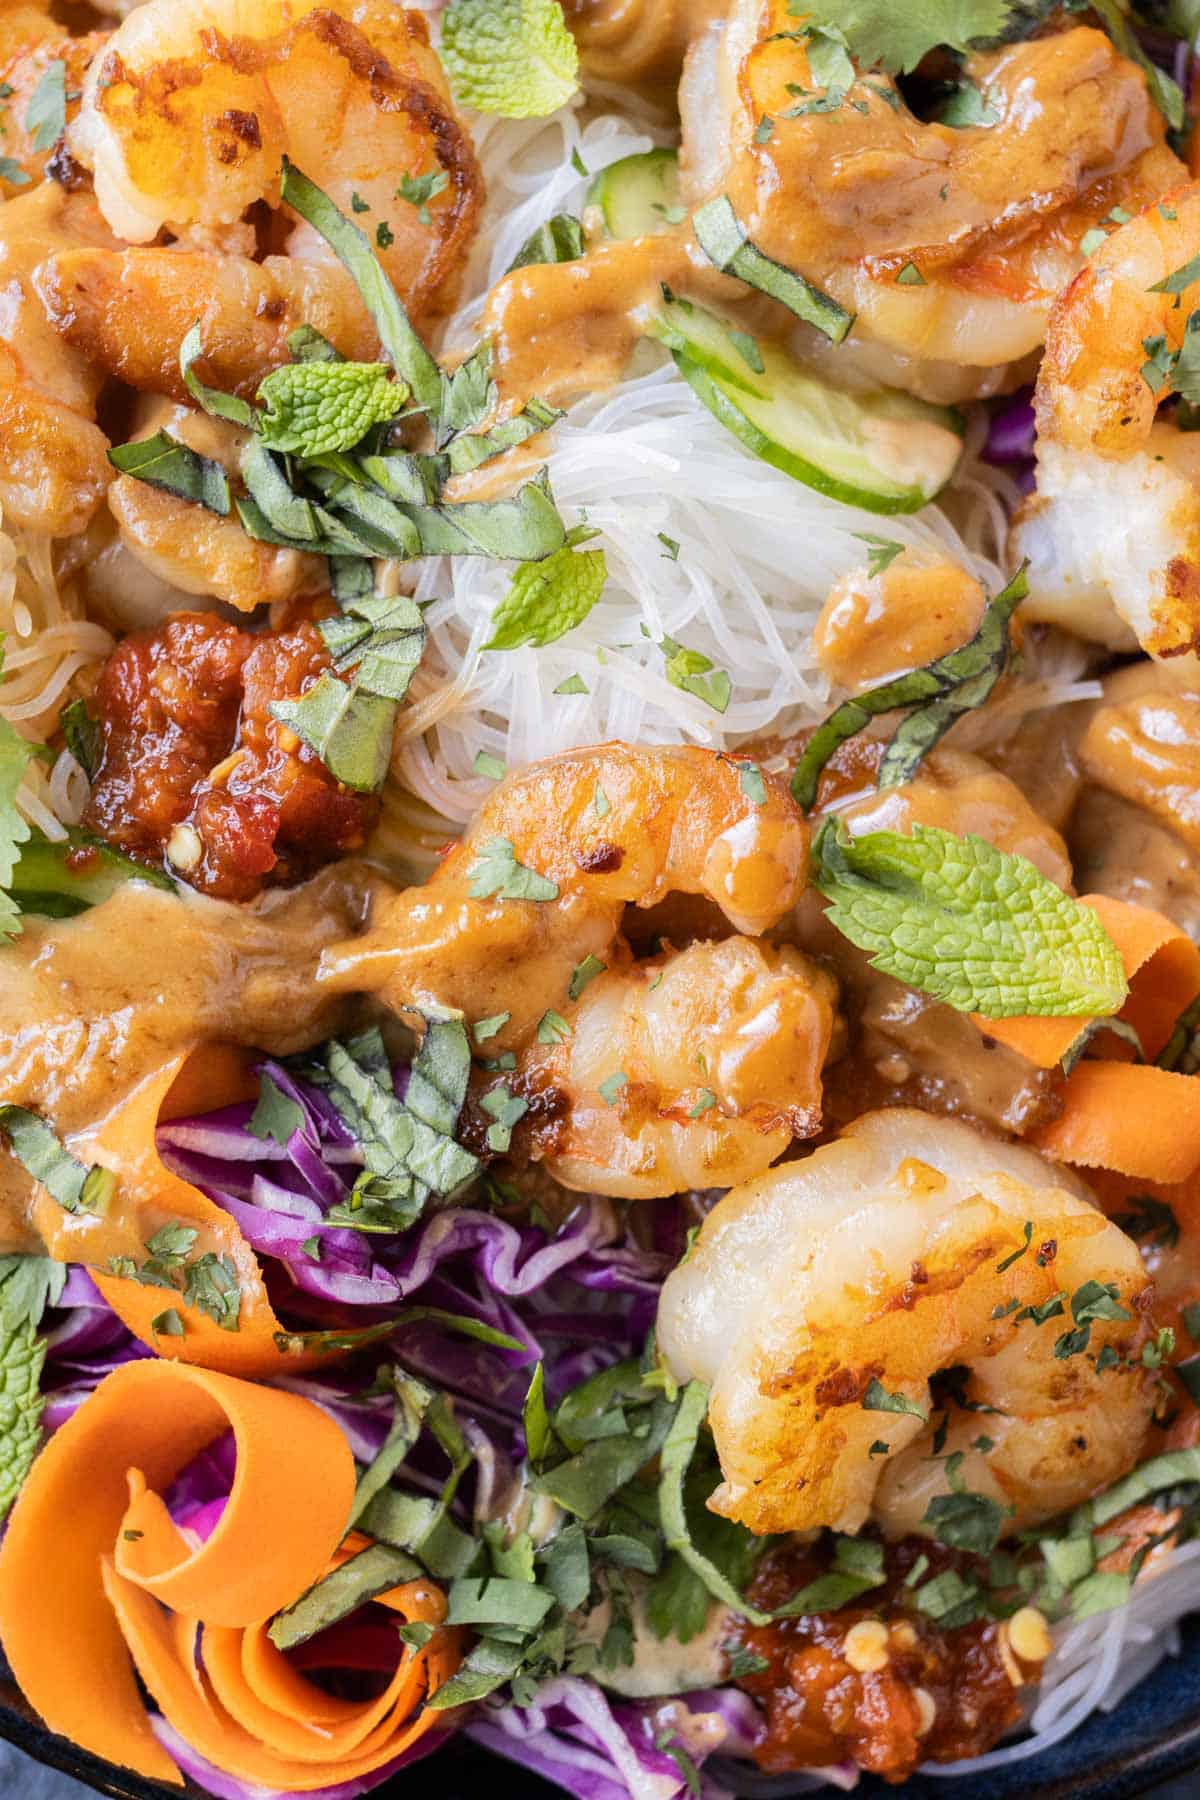 Seared shrimp in a spring roll in a bowl recipe with peanut sauce drizzled on top.